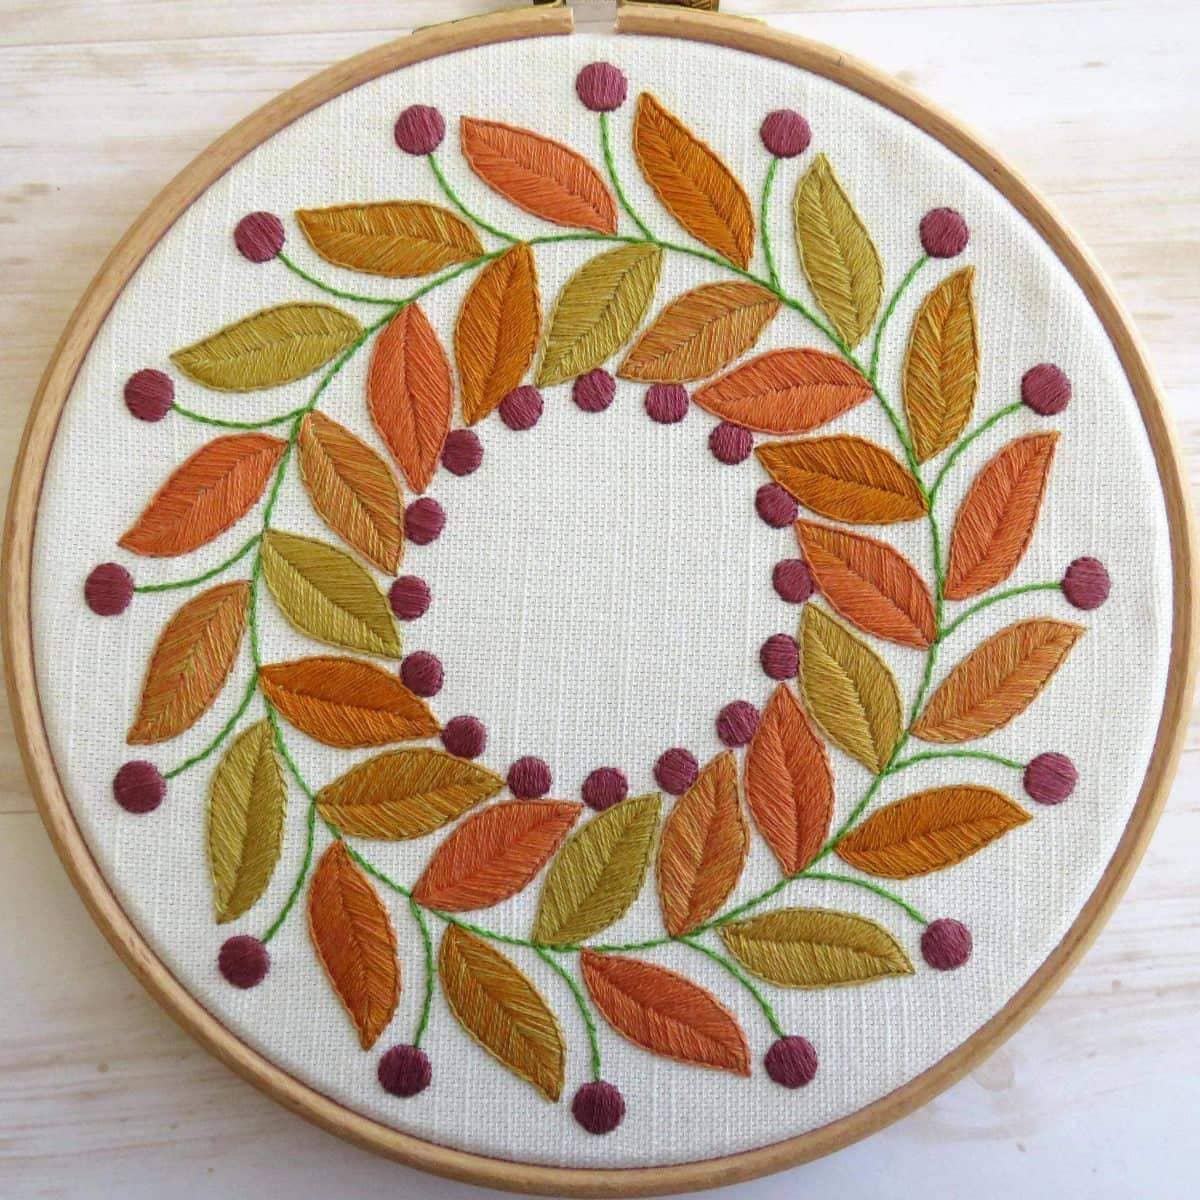 Over 100 Free Hand Embroidery Patterns – Needle Work